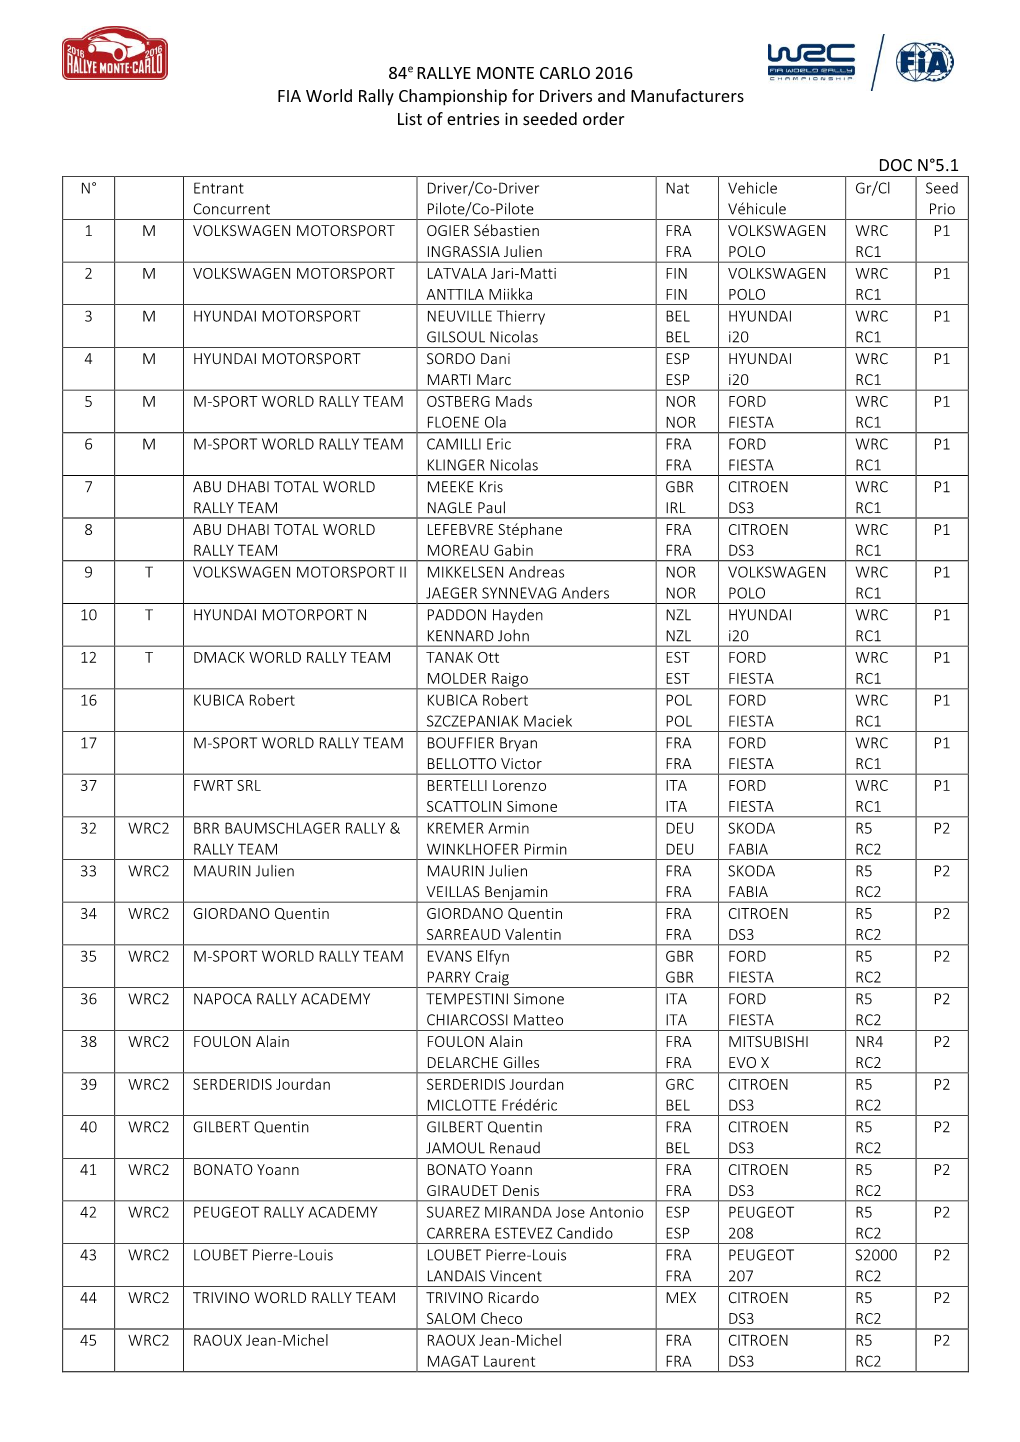 84E RALLYE MONTE CARLO 2016 FIA World Rally Championship for Drivers and Manufacturers List of Entries in Seeded Order